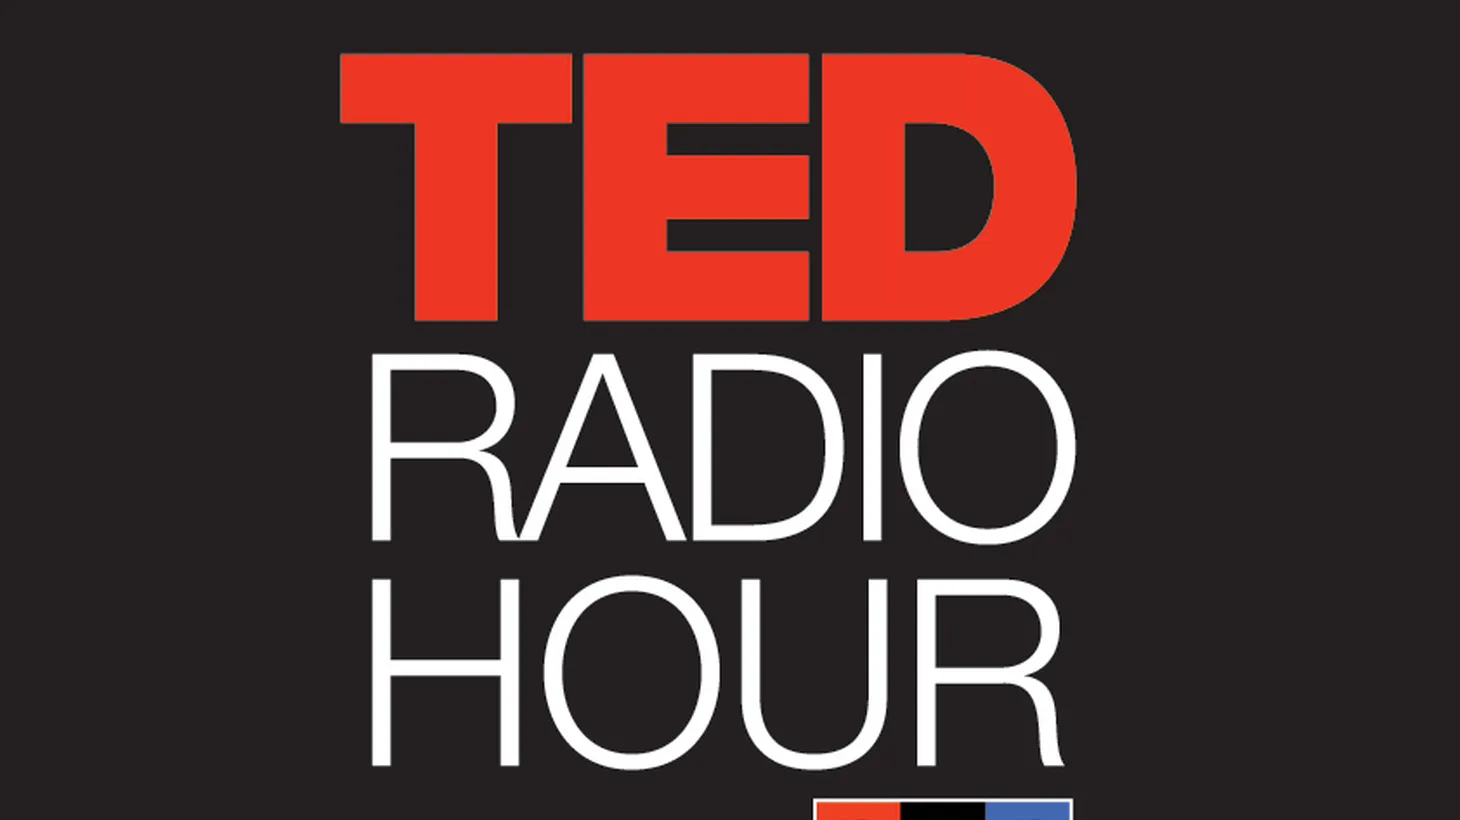 Cities are among our greatest experiments in human co-habitation. Do they also hold the answers to some of our biggest problems? This hour, TED speakers explore how cities can change the world.